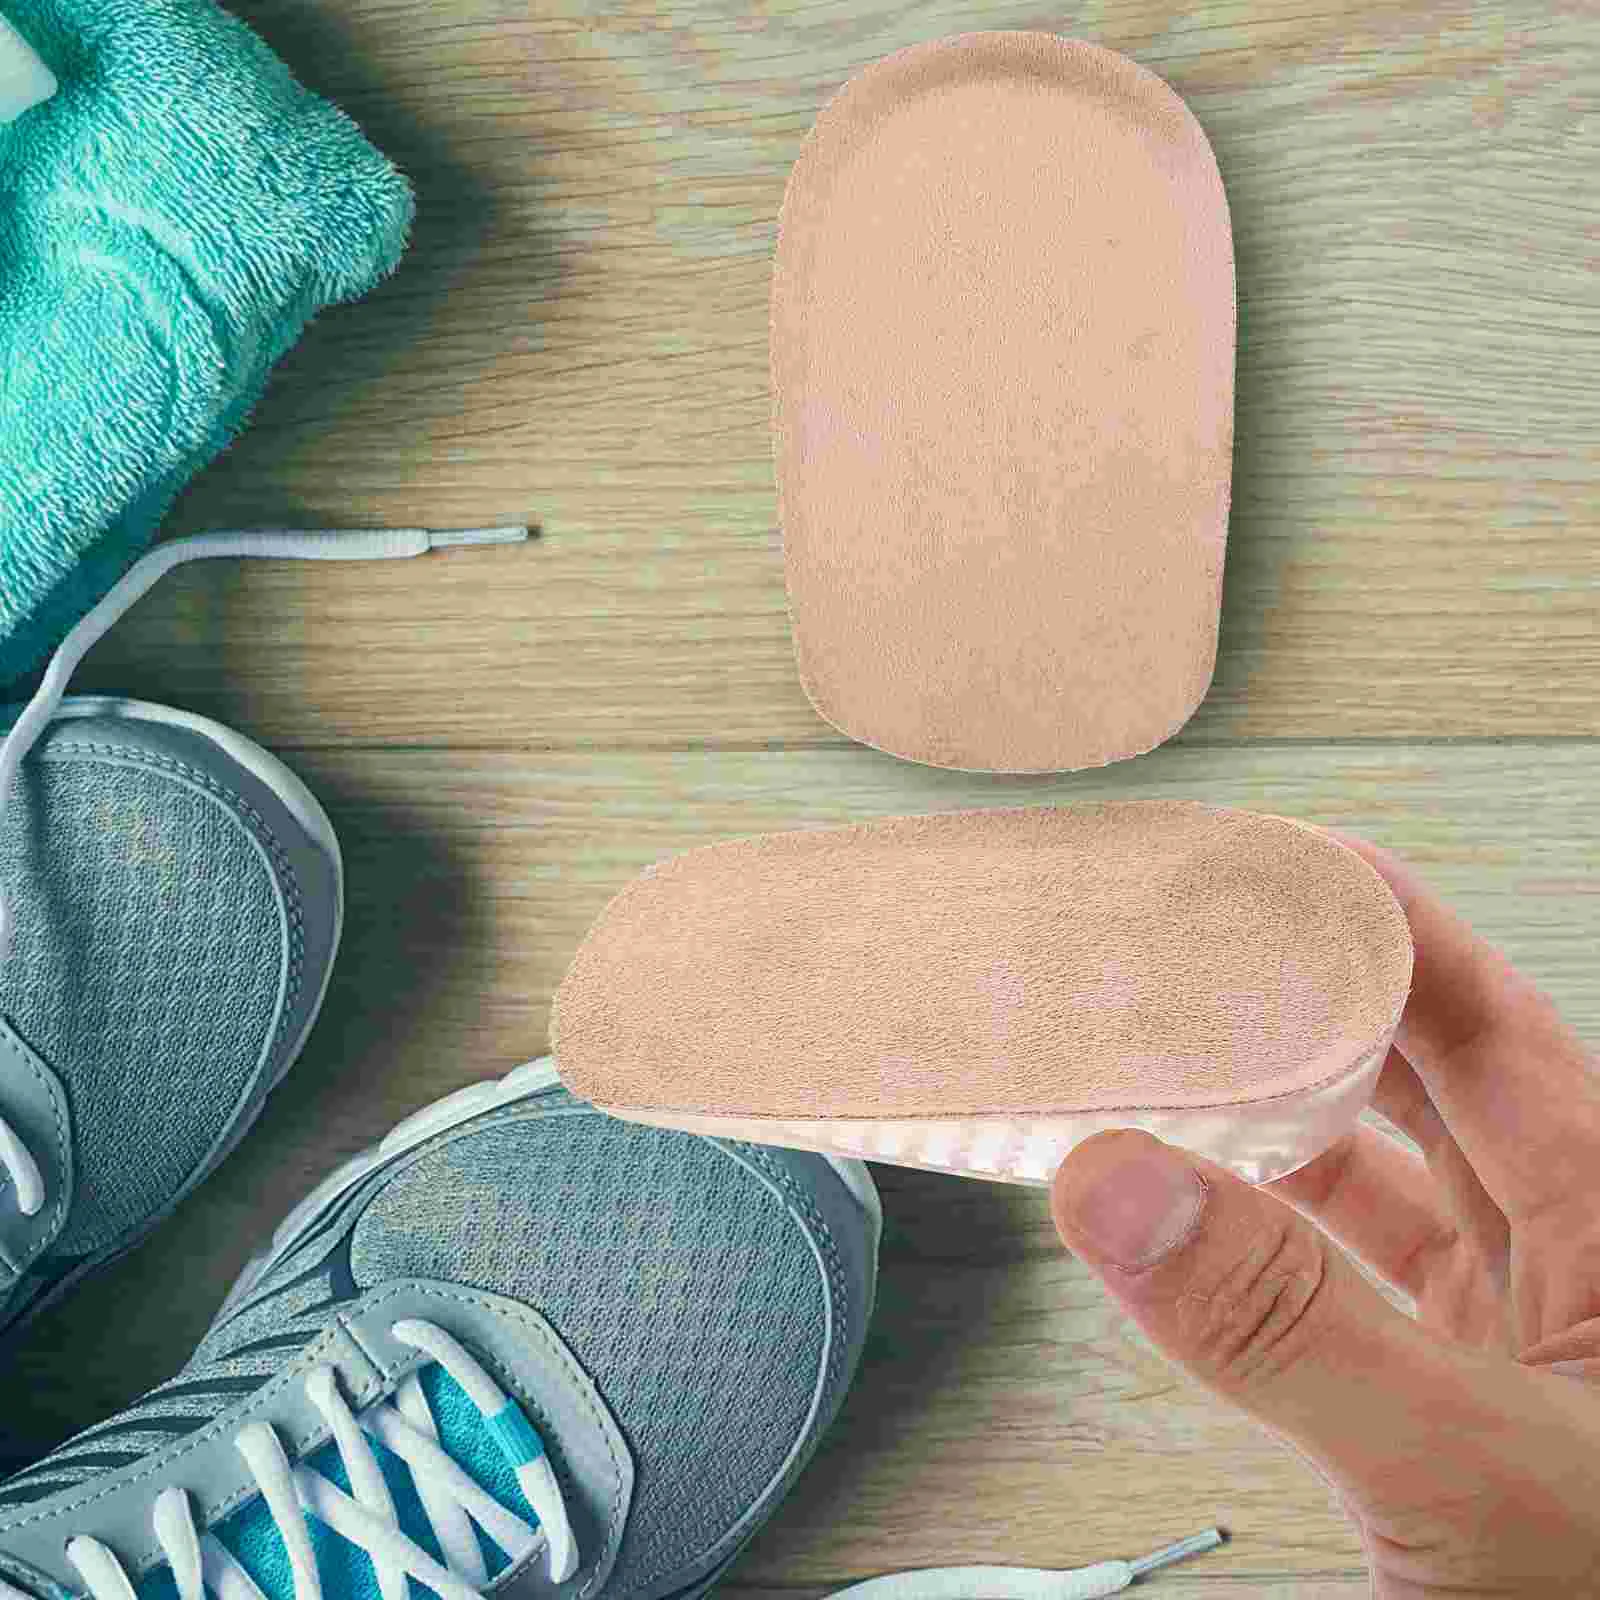 

1cm Heightening Half Insole Invisibility Absorption Front Insole Shoe Pad Heelpiece Cushion Size L (Apricot)